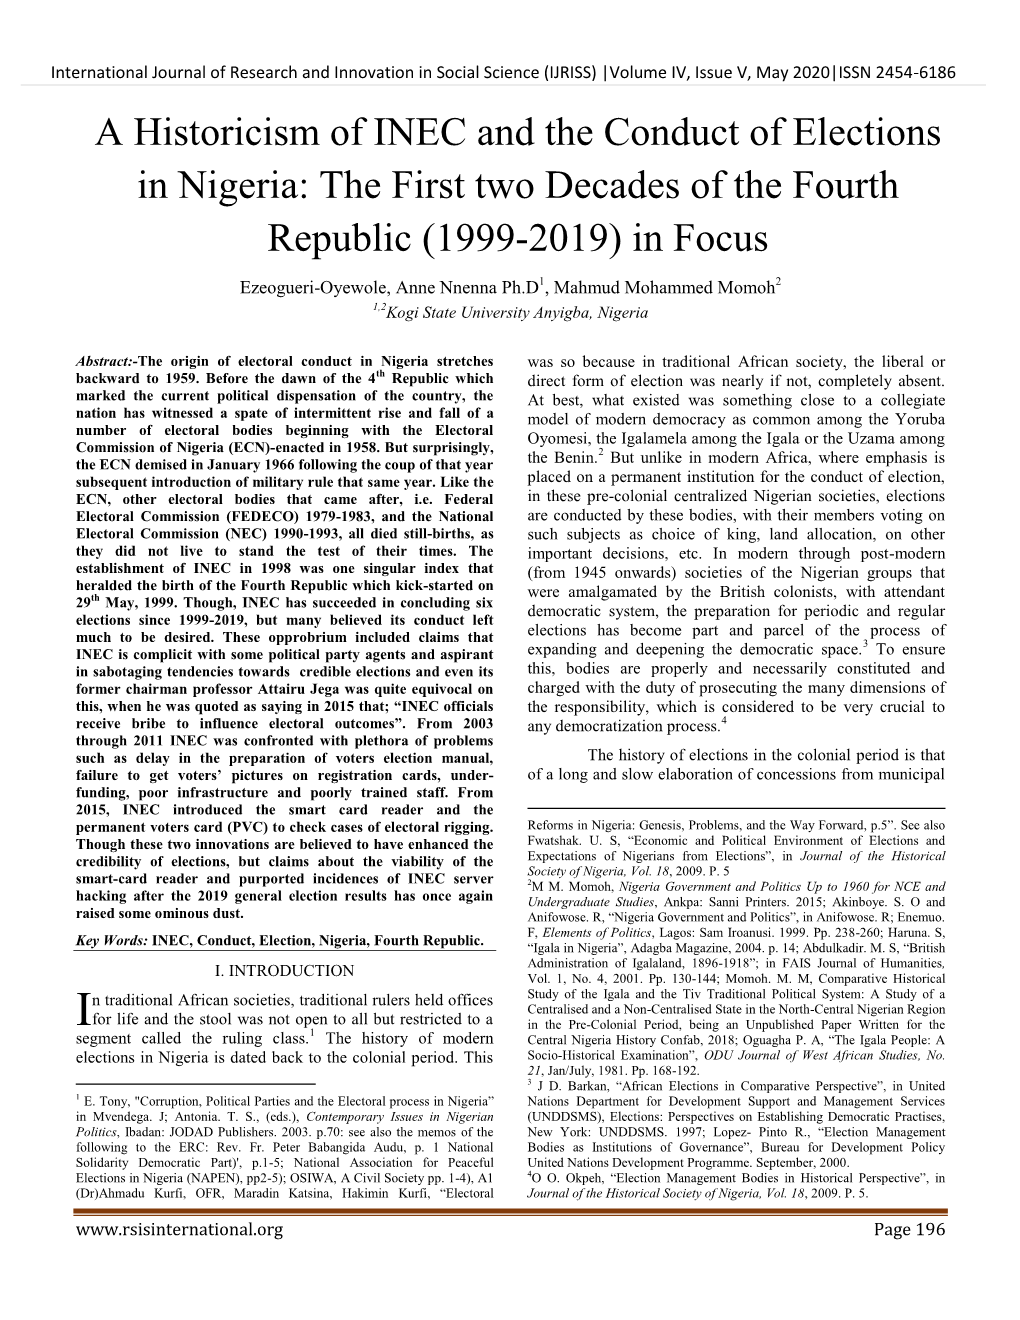 A Historicism of INEC and the Conduct of Elections in Nigeria: the First Two Decades of the Fourth Republic (1999-2019) in Focus